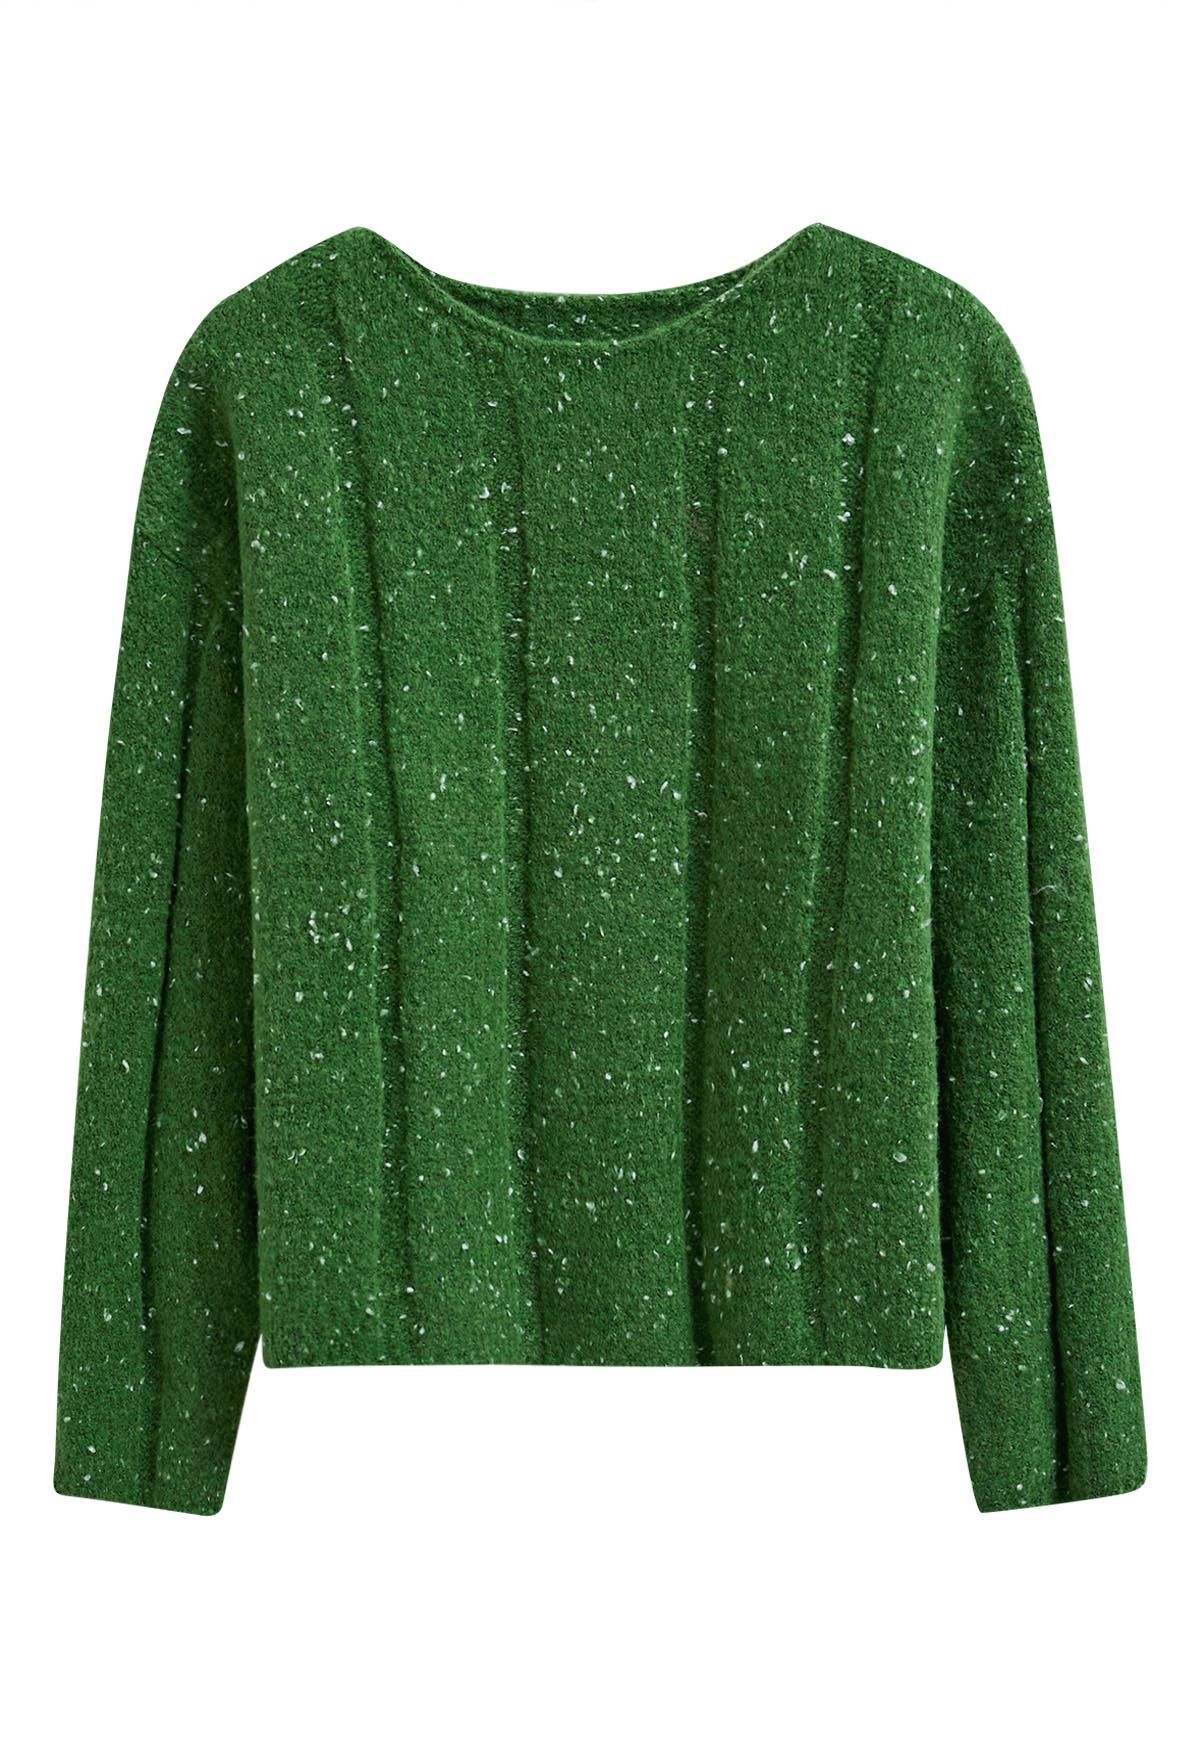 Cozy Drop Shoulder Mixed Knit Sweater in Green